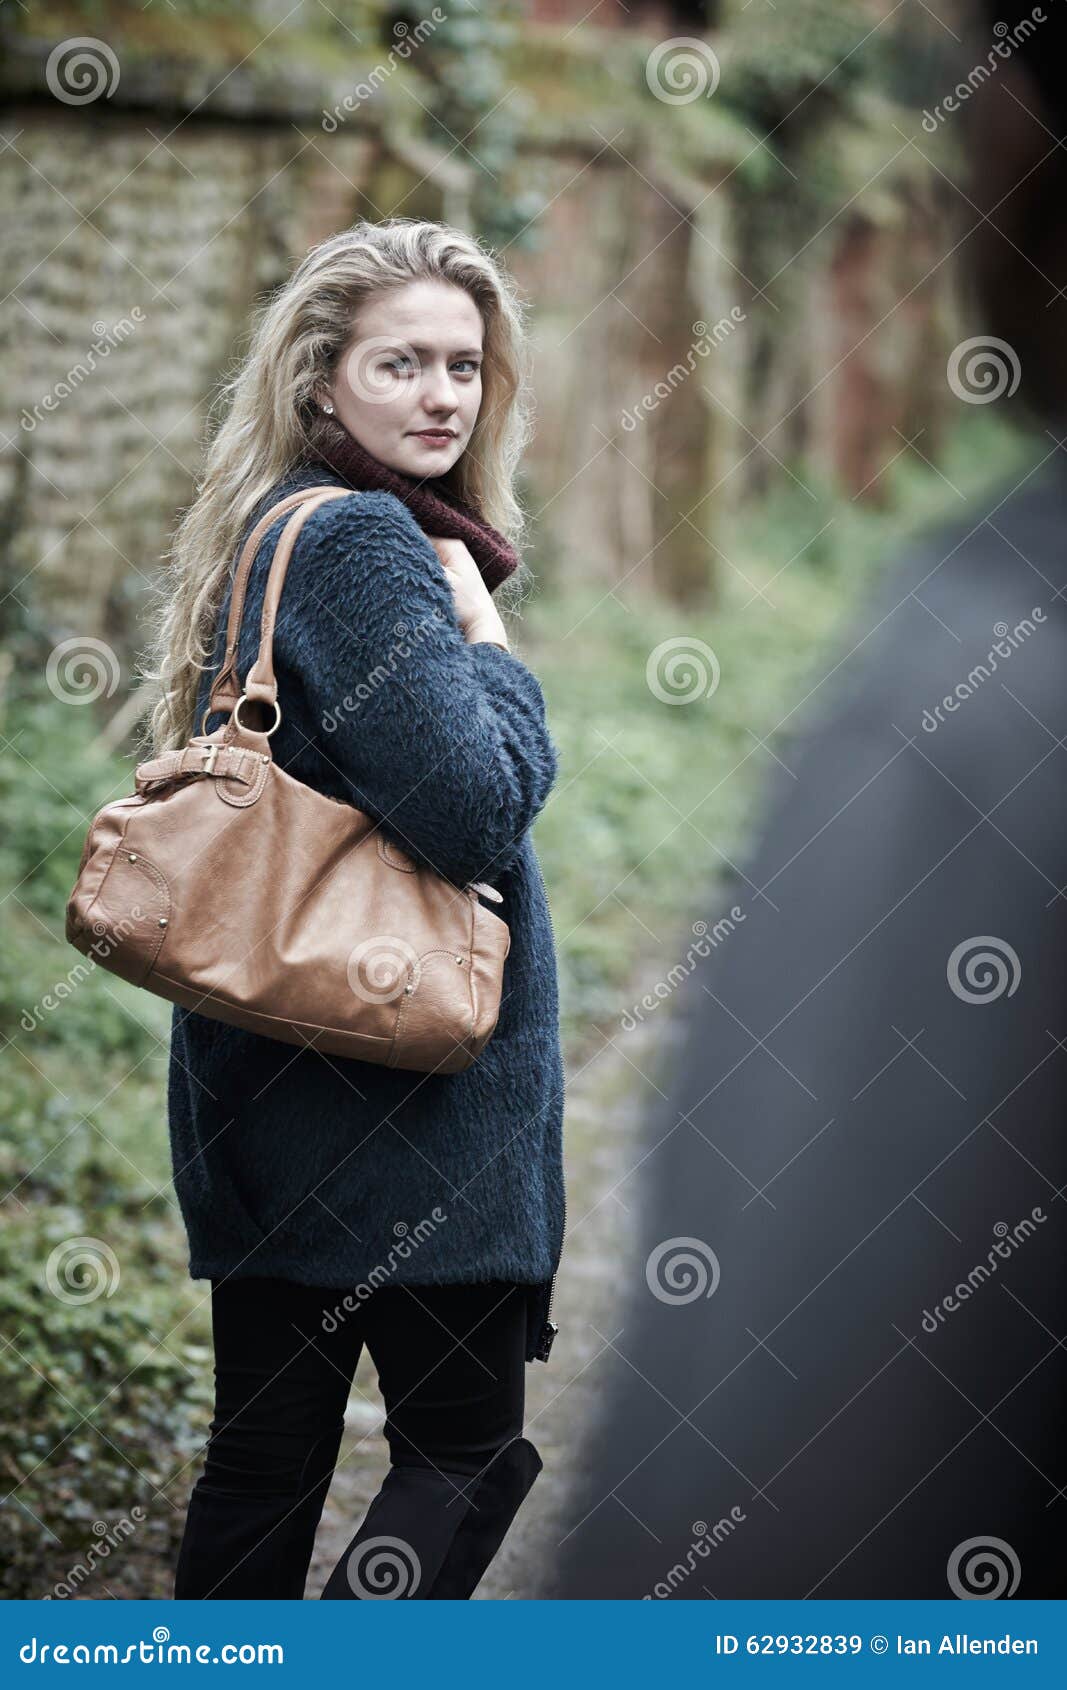 young woman feeling threatened as she walks home